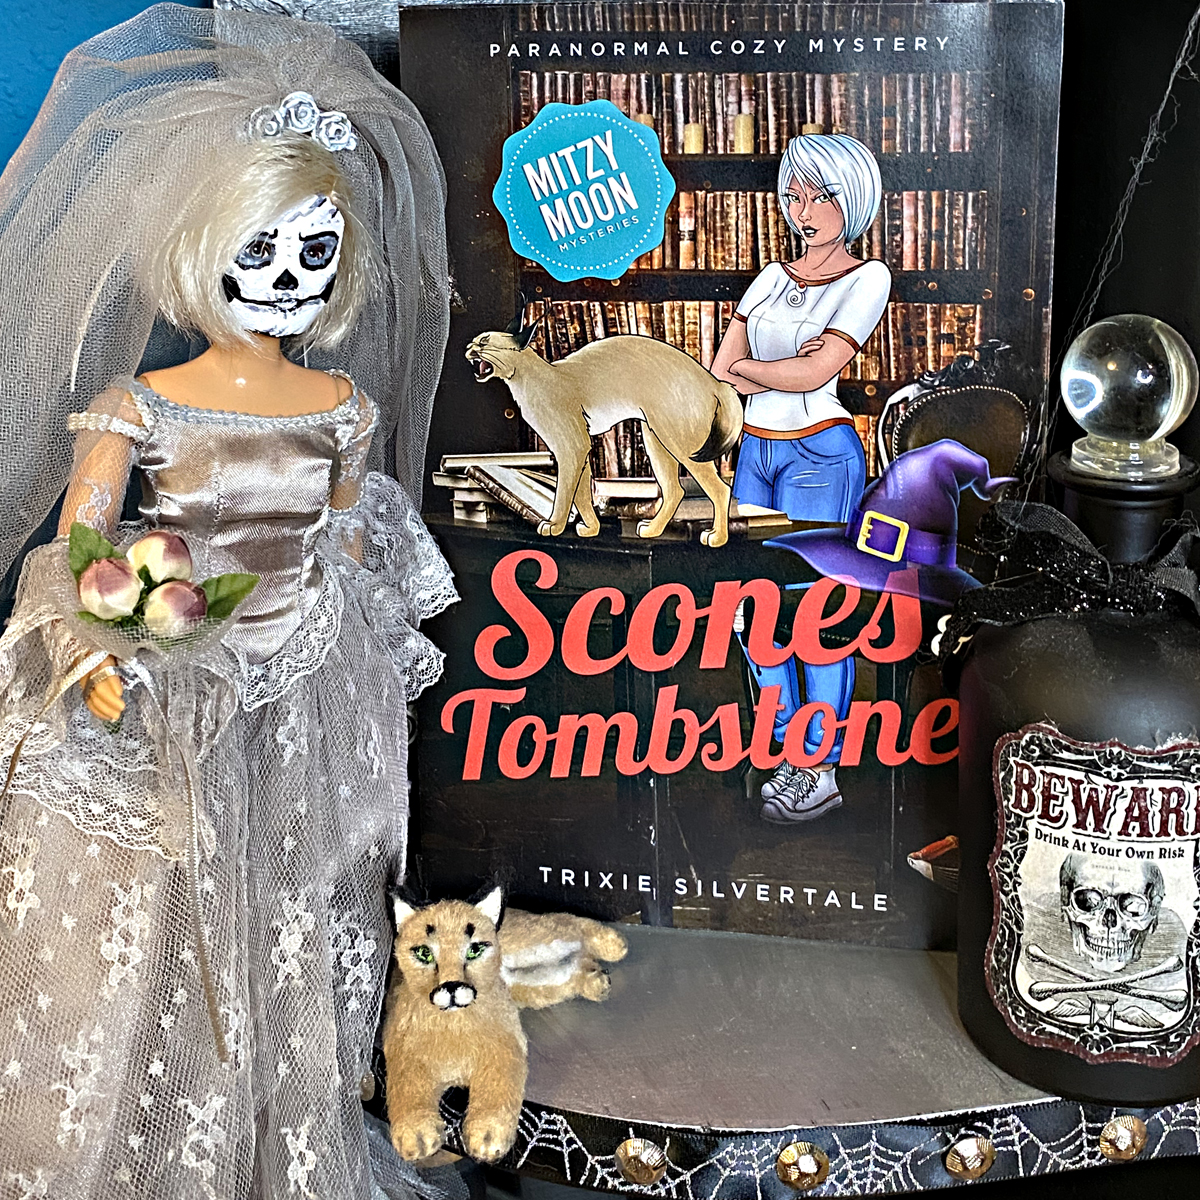 Best Halloween cozy Mystery of the year